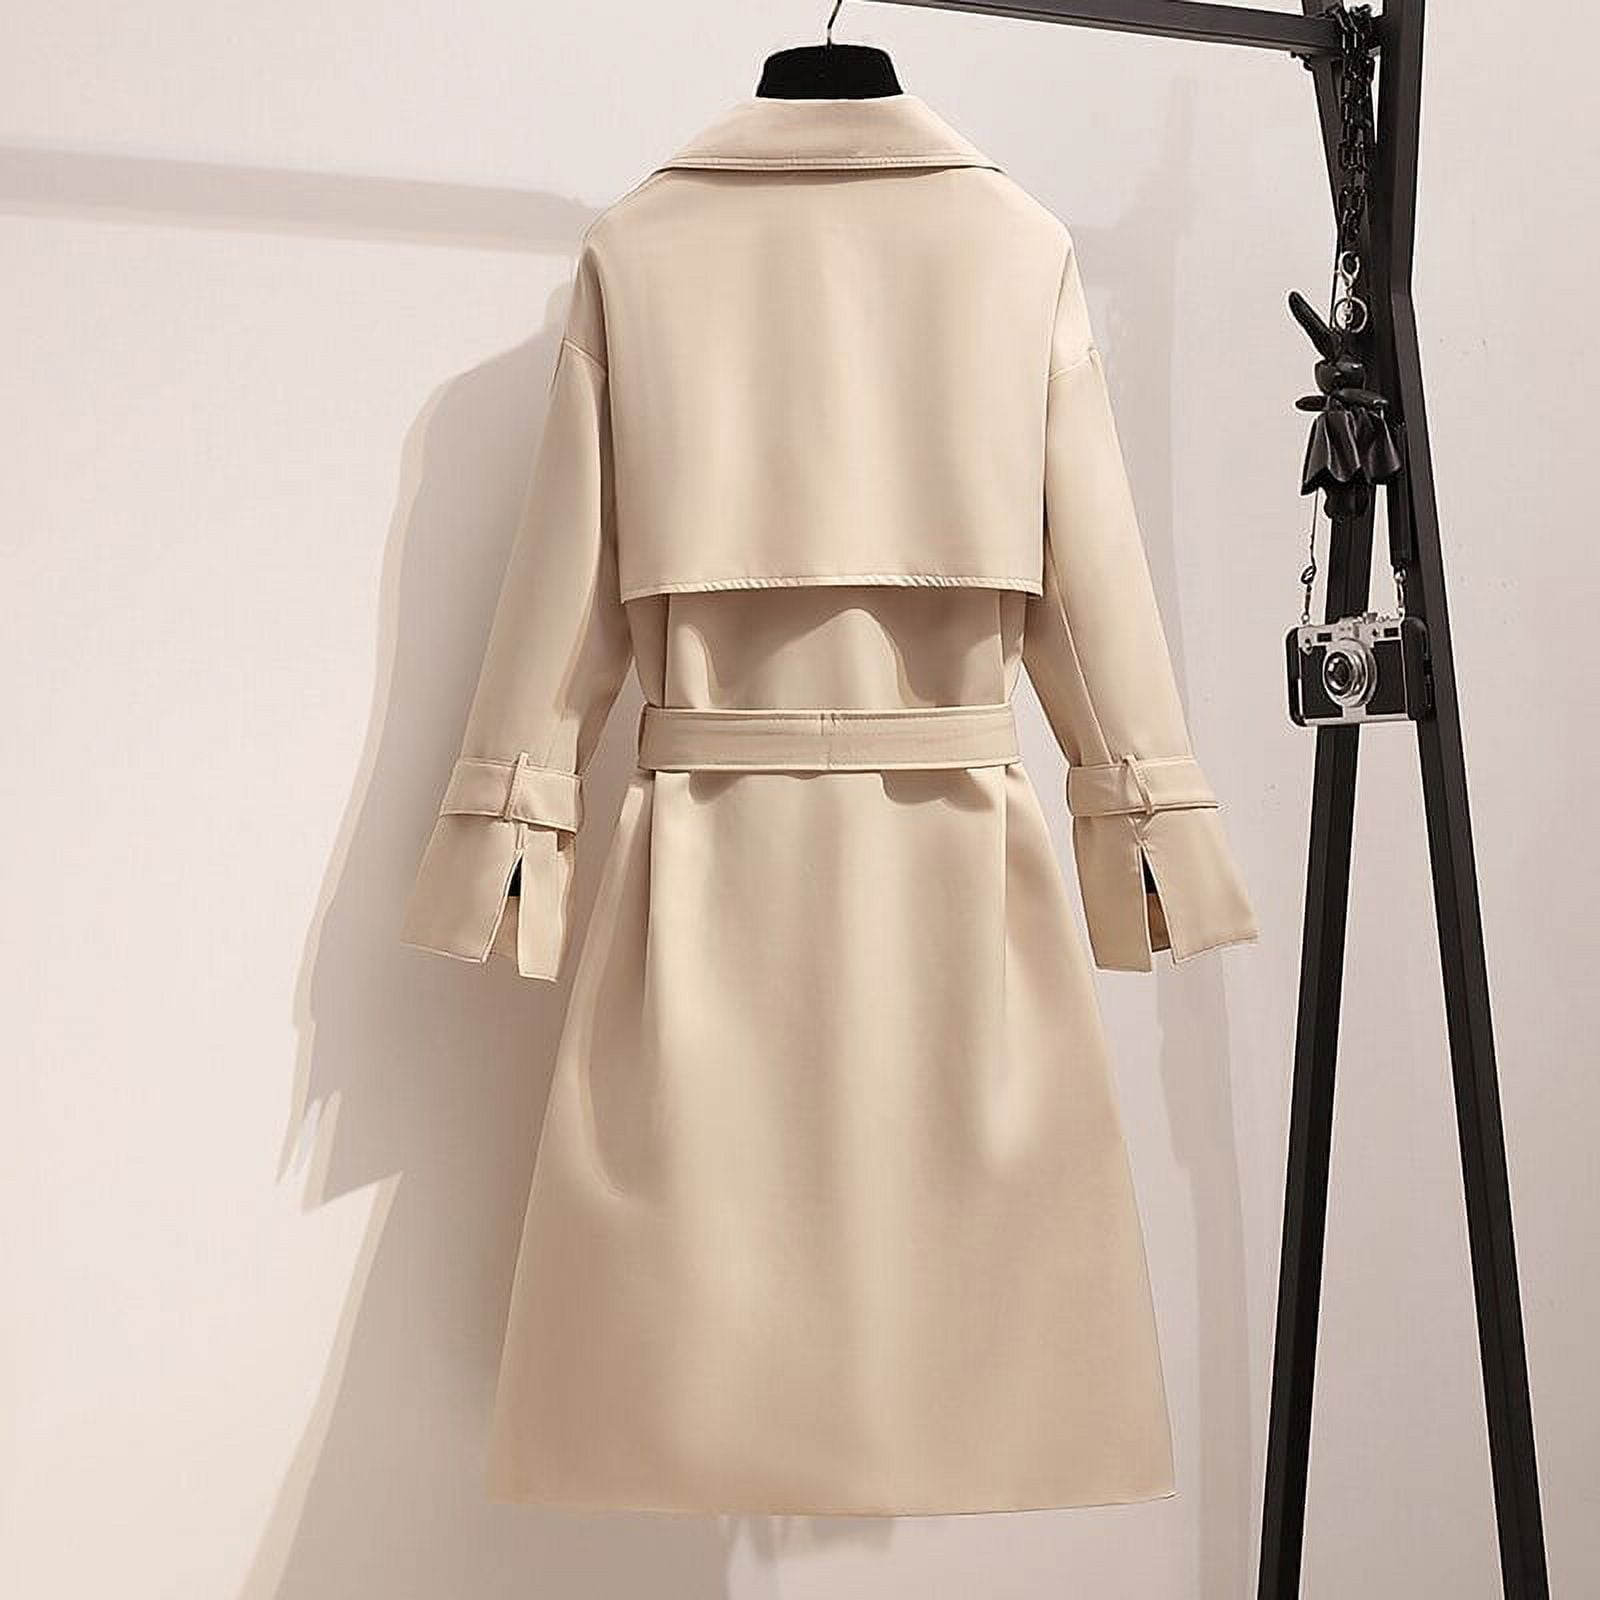 Stylish Double Breasted Long Trench Coat Buttons For Women Khaki Slim Belt  Cloak Windbreaker In Plus Size Perfect For Spring And Autumn P194 T200828  From Xue04, $42.3